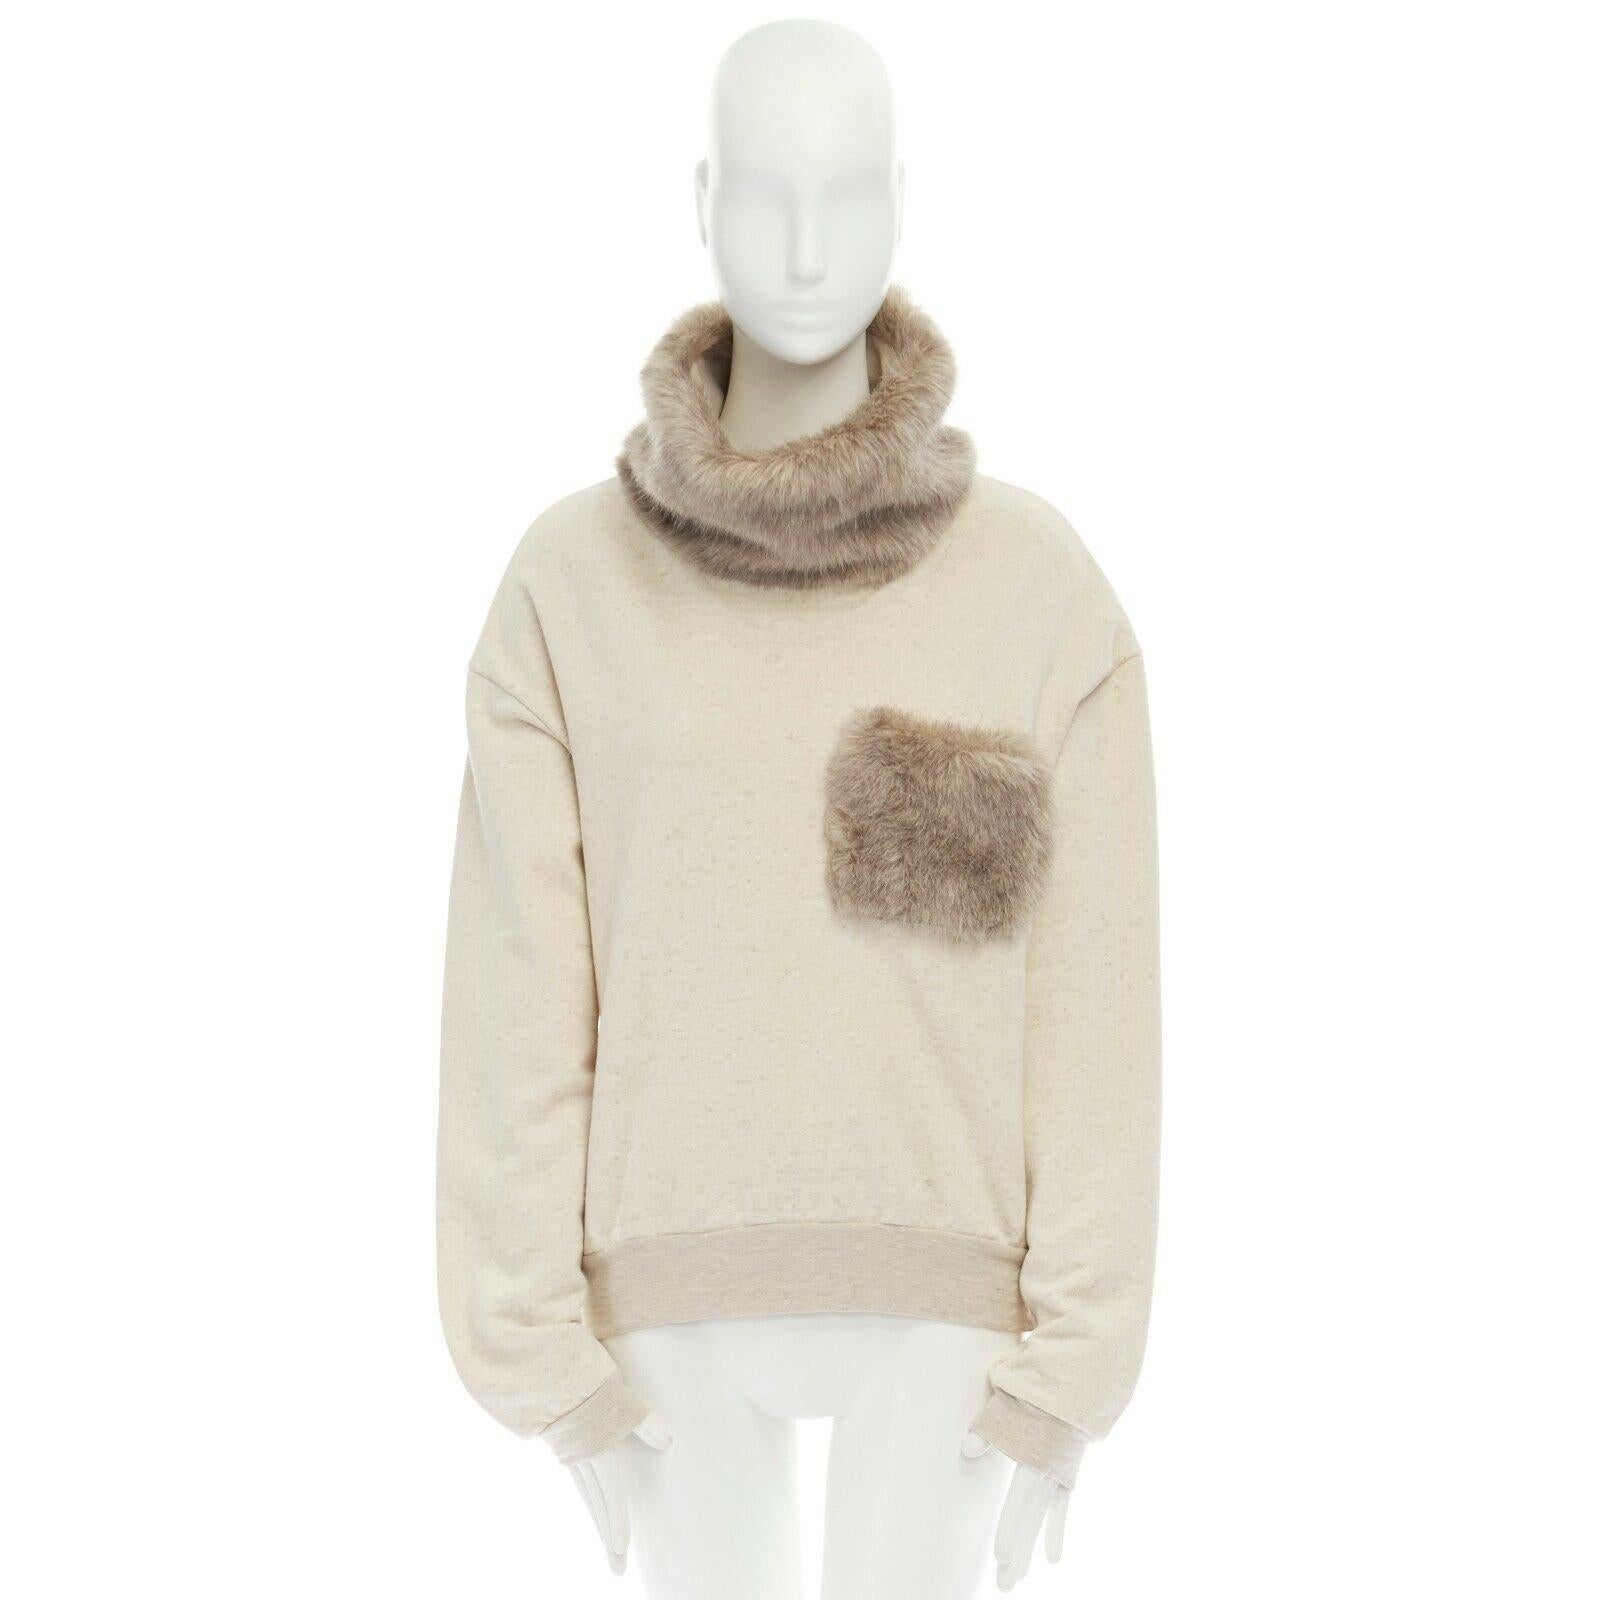 KAPITAL JAPAN beige cotton faux fur collar patch pocket oversized sweater top S Reference: JETI/A00121 
Brand: Kapital 
Material: Cotton 
Color: Cream 
Pattern: Solid 
Extra Detail: Cotton, linen. Light brown faux fur mock collar. Faux fur patched